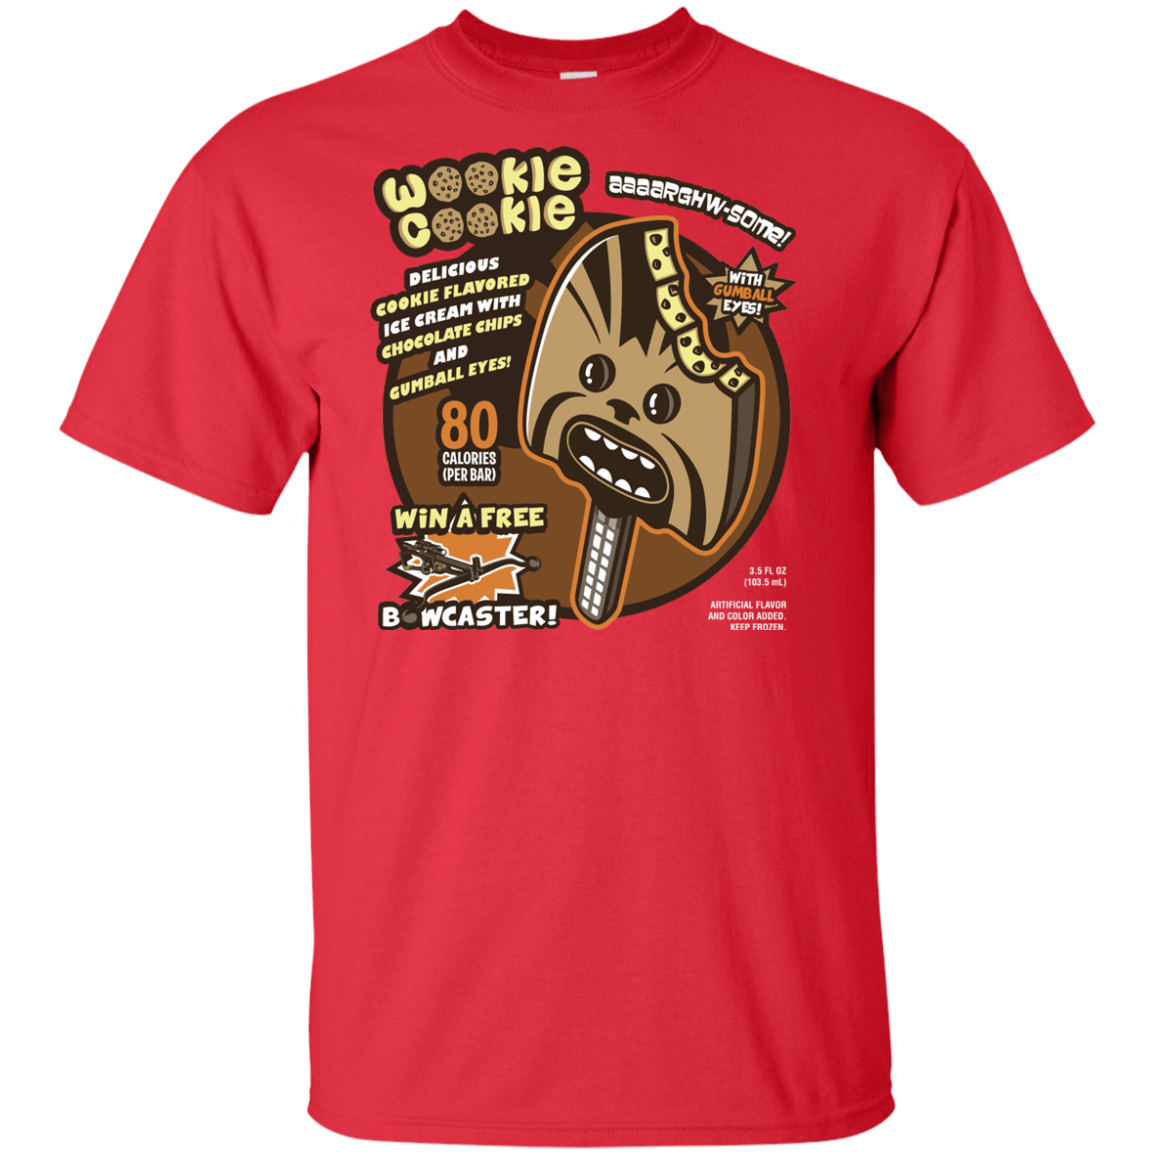 Wookie Cookie Tall T-Shirt